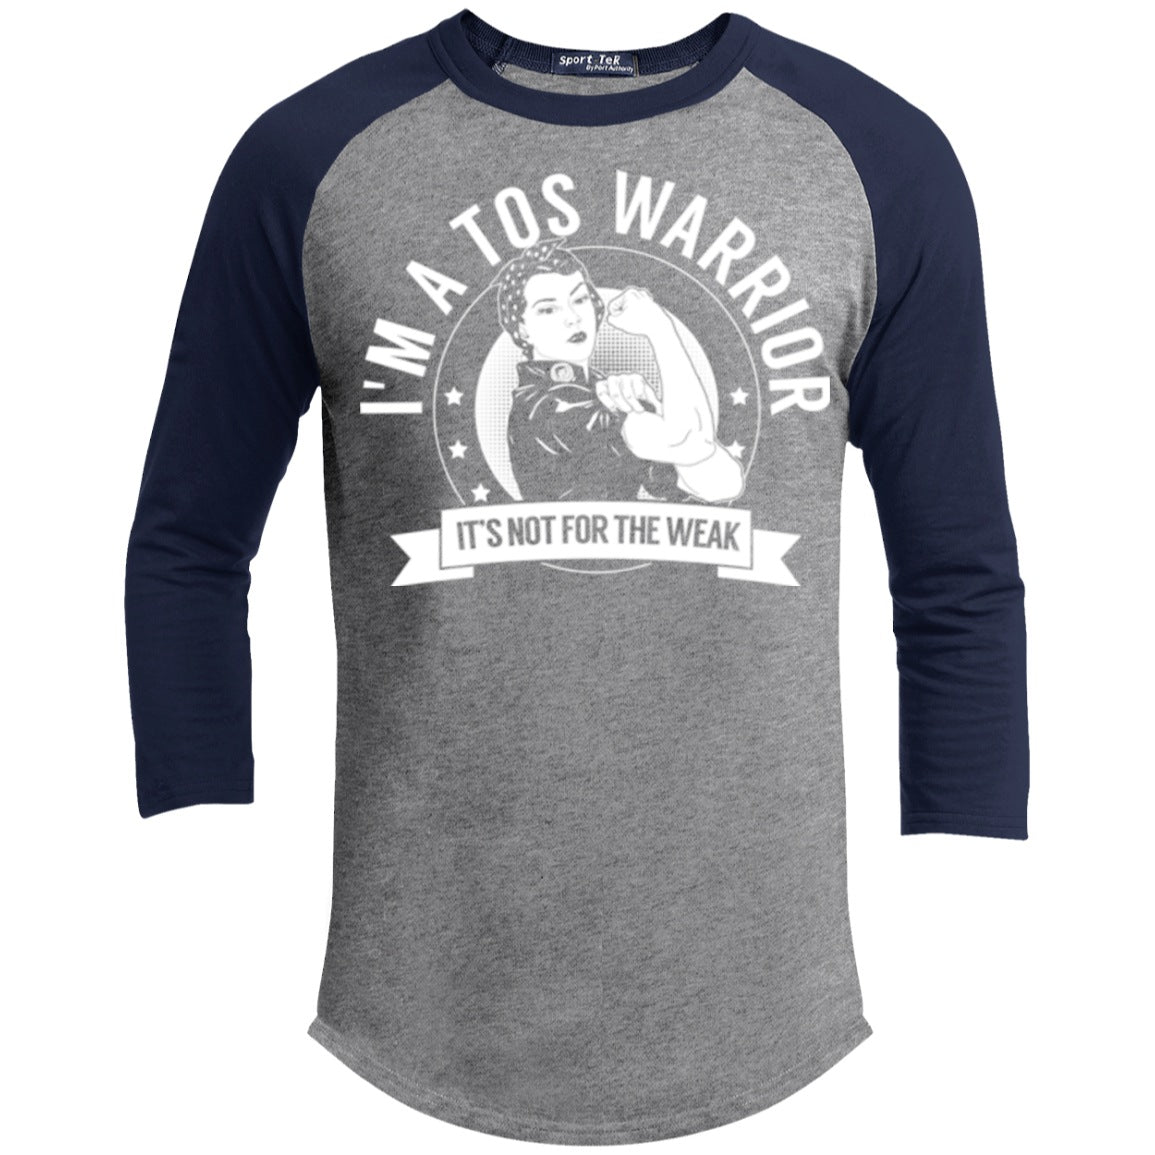 Thoracic Outlet Syndrome - TOS Warrior Not For The Weak Baseball Shirt - The Unchargeables